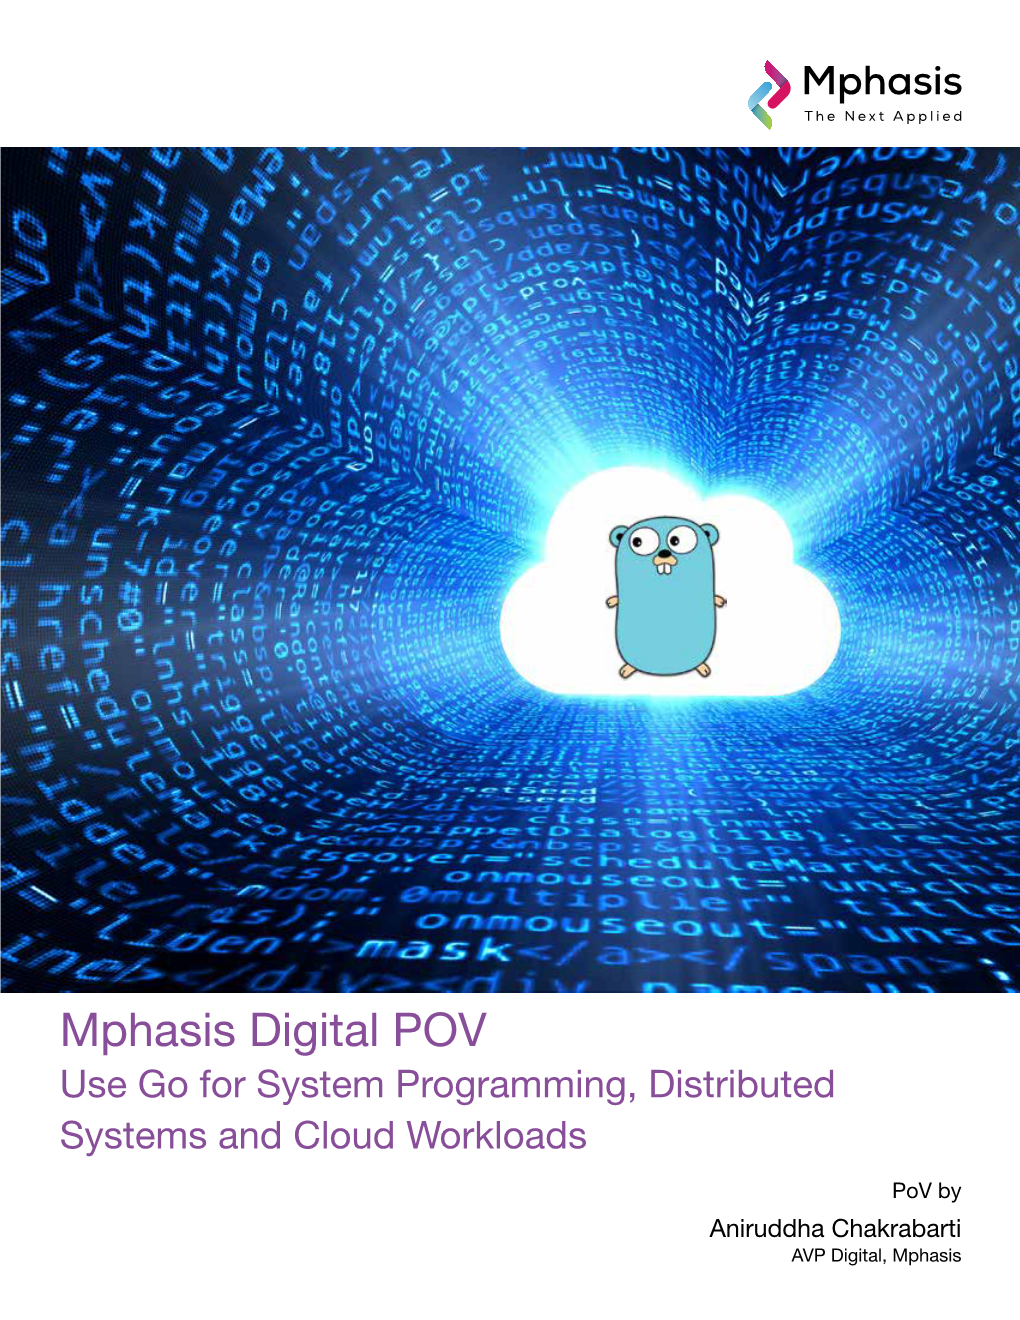 Mphasis Digital POV Use Go for System Programming, Distributed Systems and Cloud Workloads